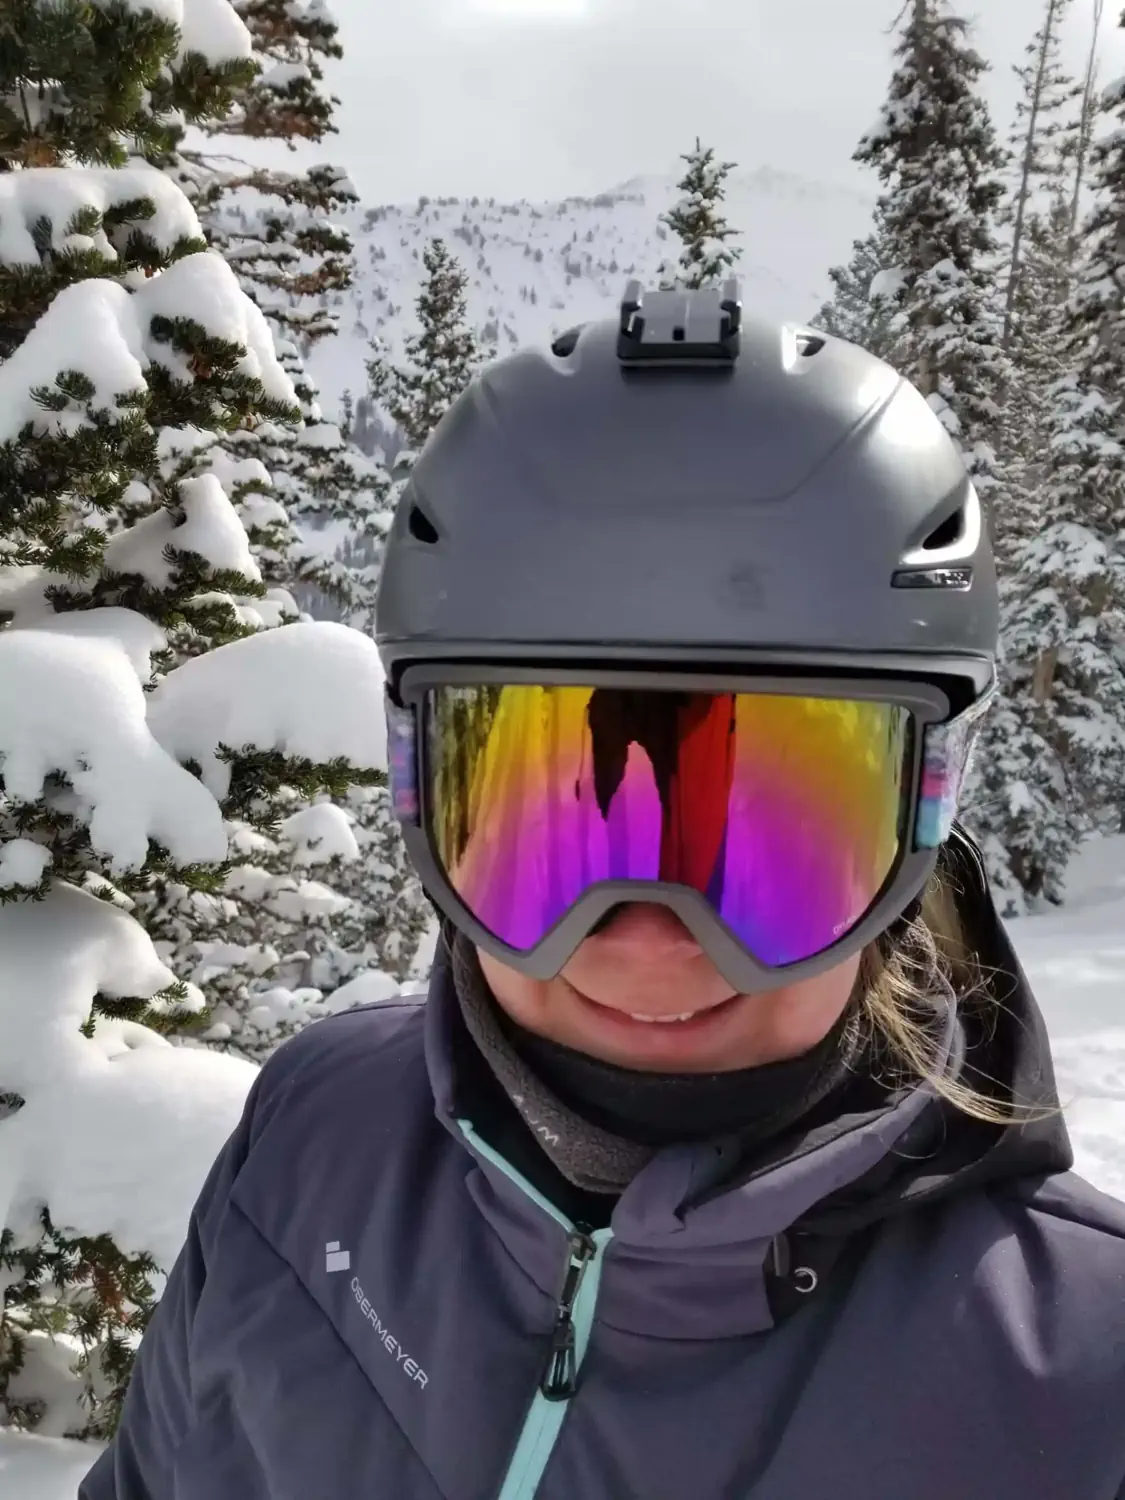 Lindsey is showing off her new ski goggles